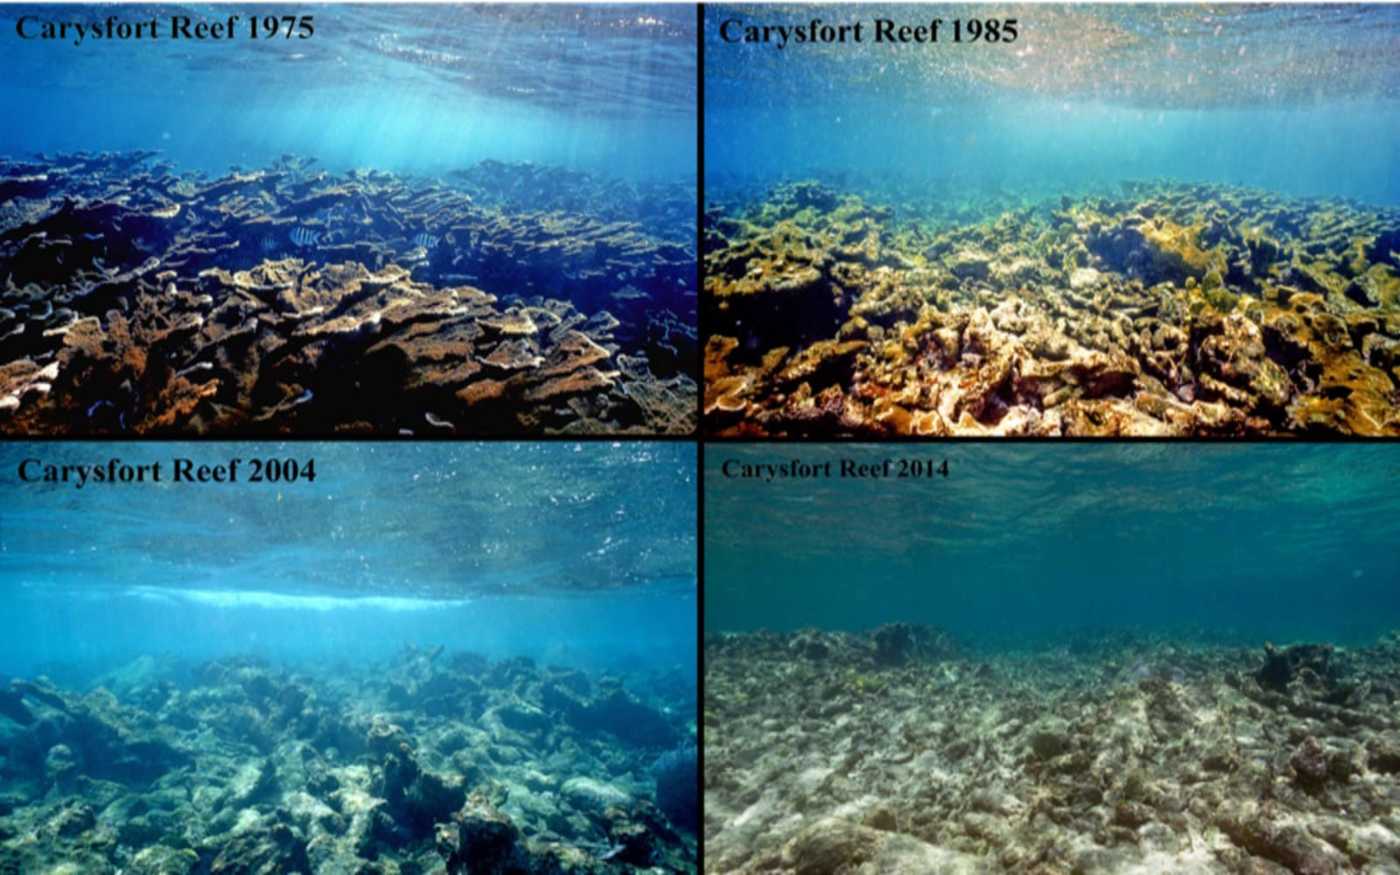 Collage of four different pircures of the Carysfort reef from 1975, 1985, 2004 and 2014